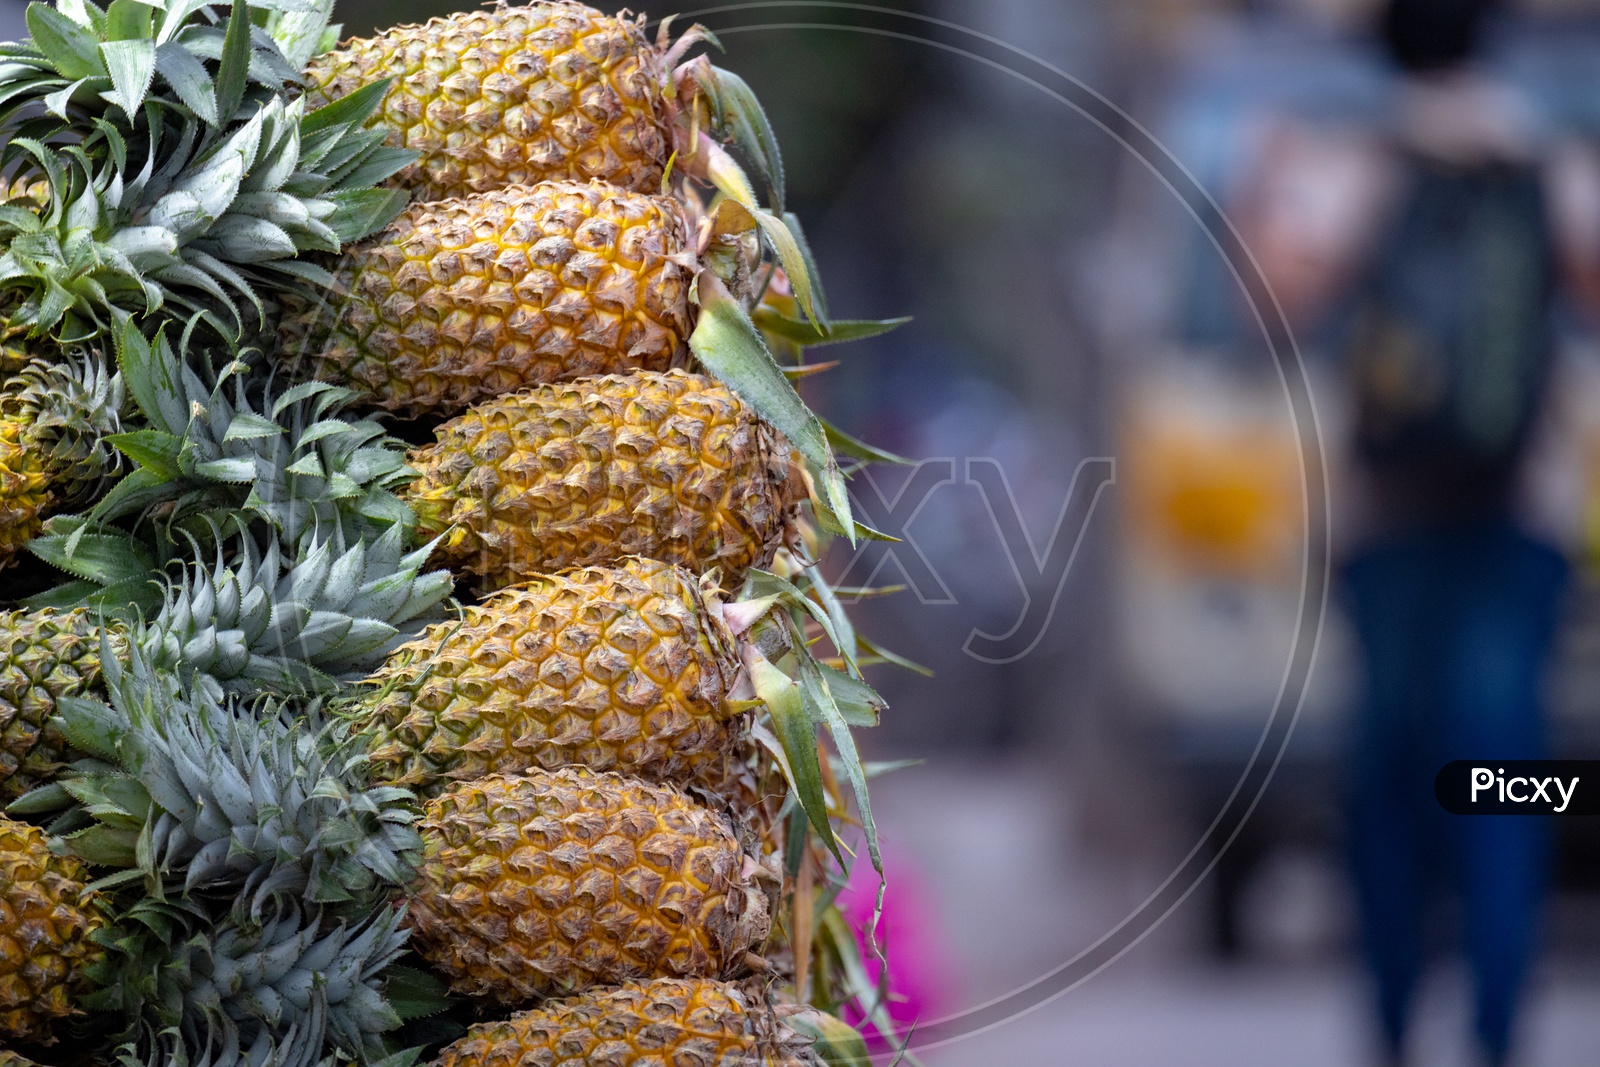 Pineapple fruits being sold